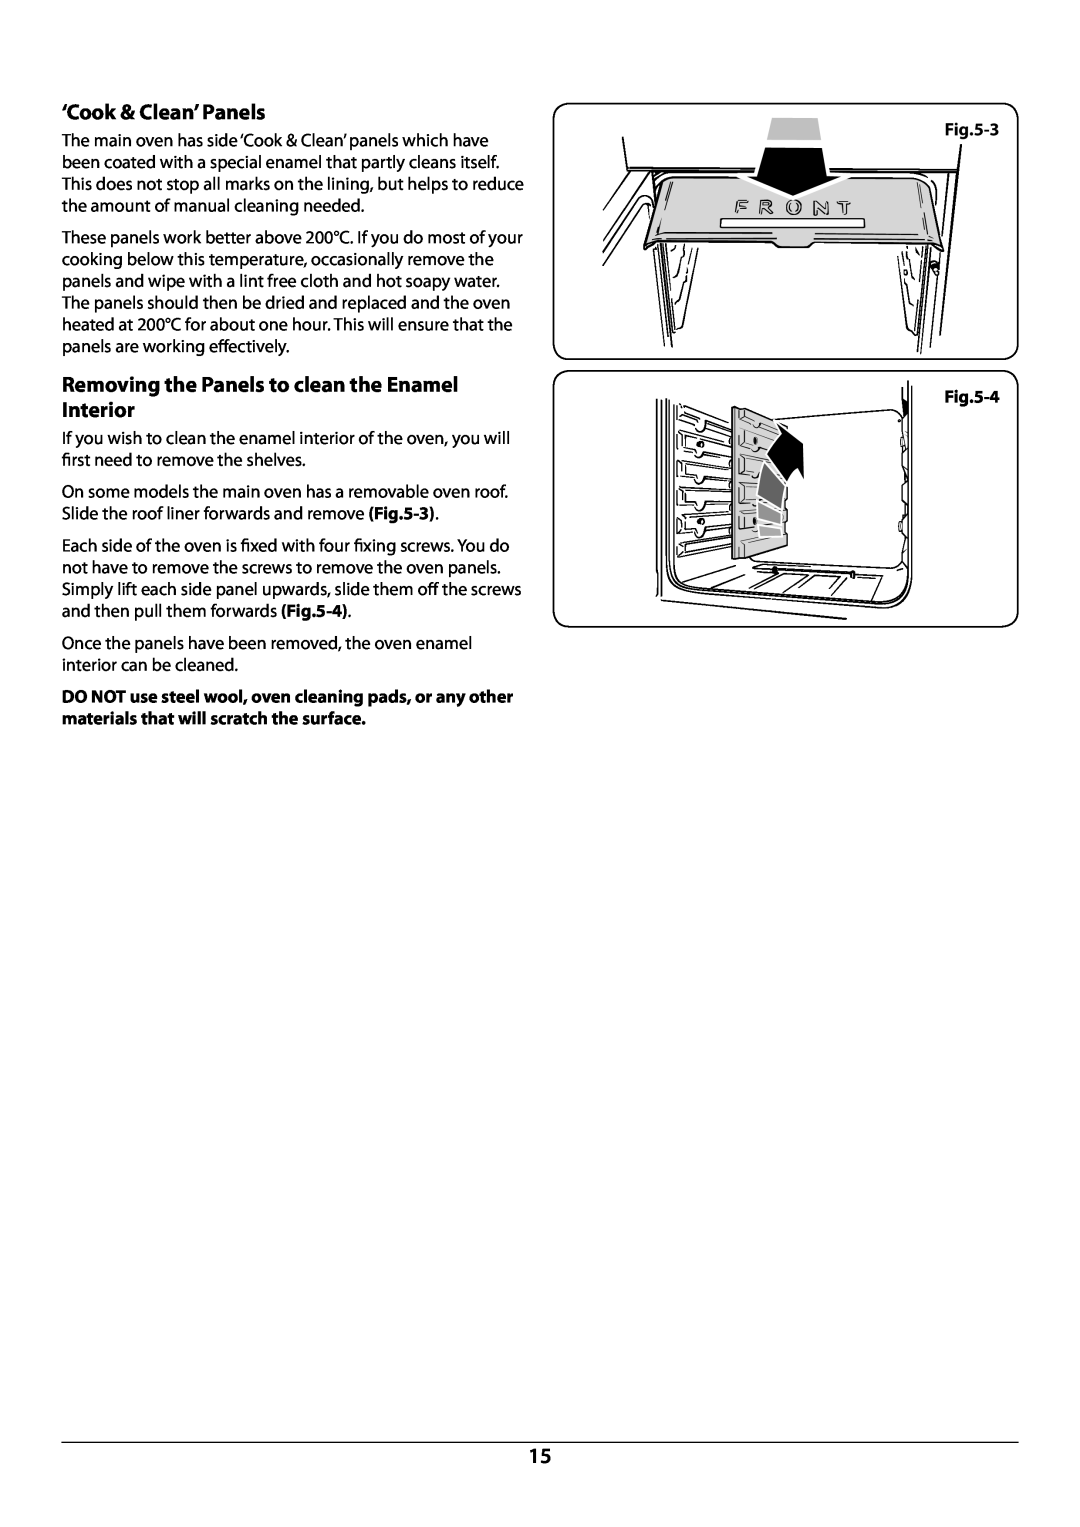 Rangemaster U109948 - 04 manual ‘Cook & Clean’ Panels, Removing the Panels to clean the Enamel Interior 